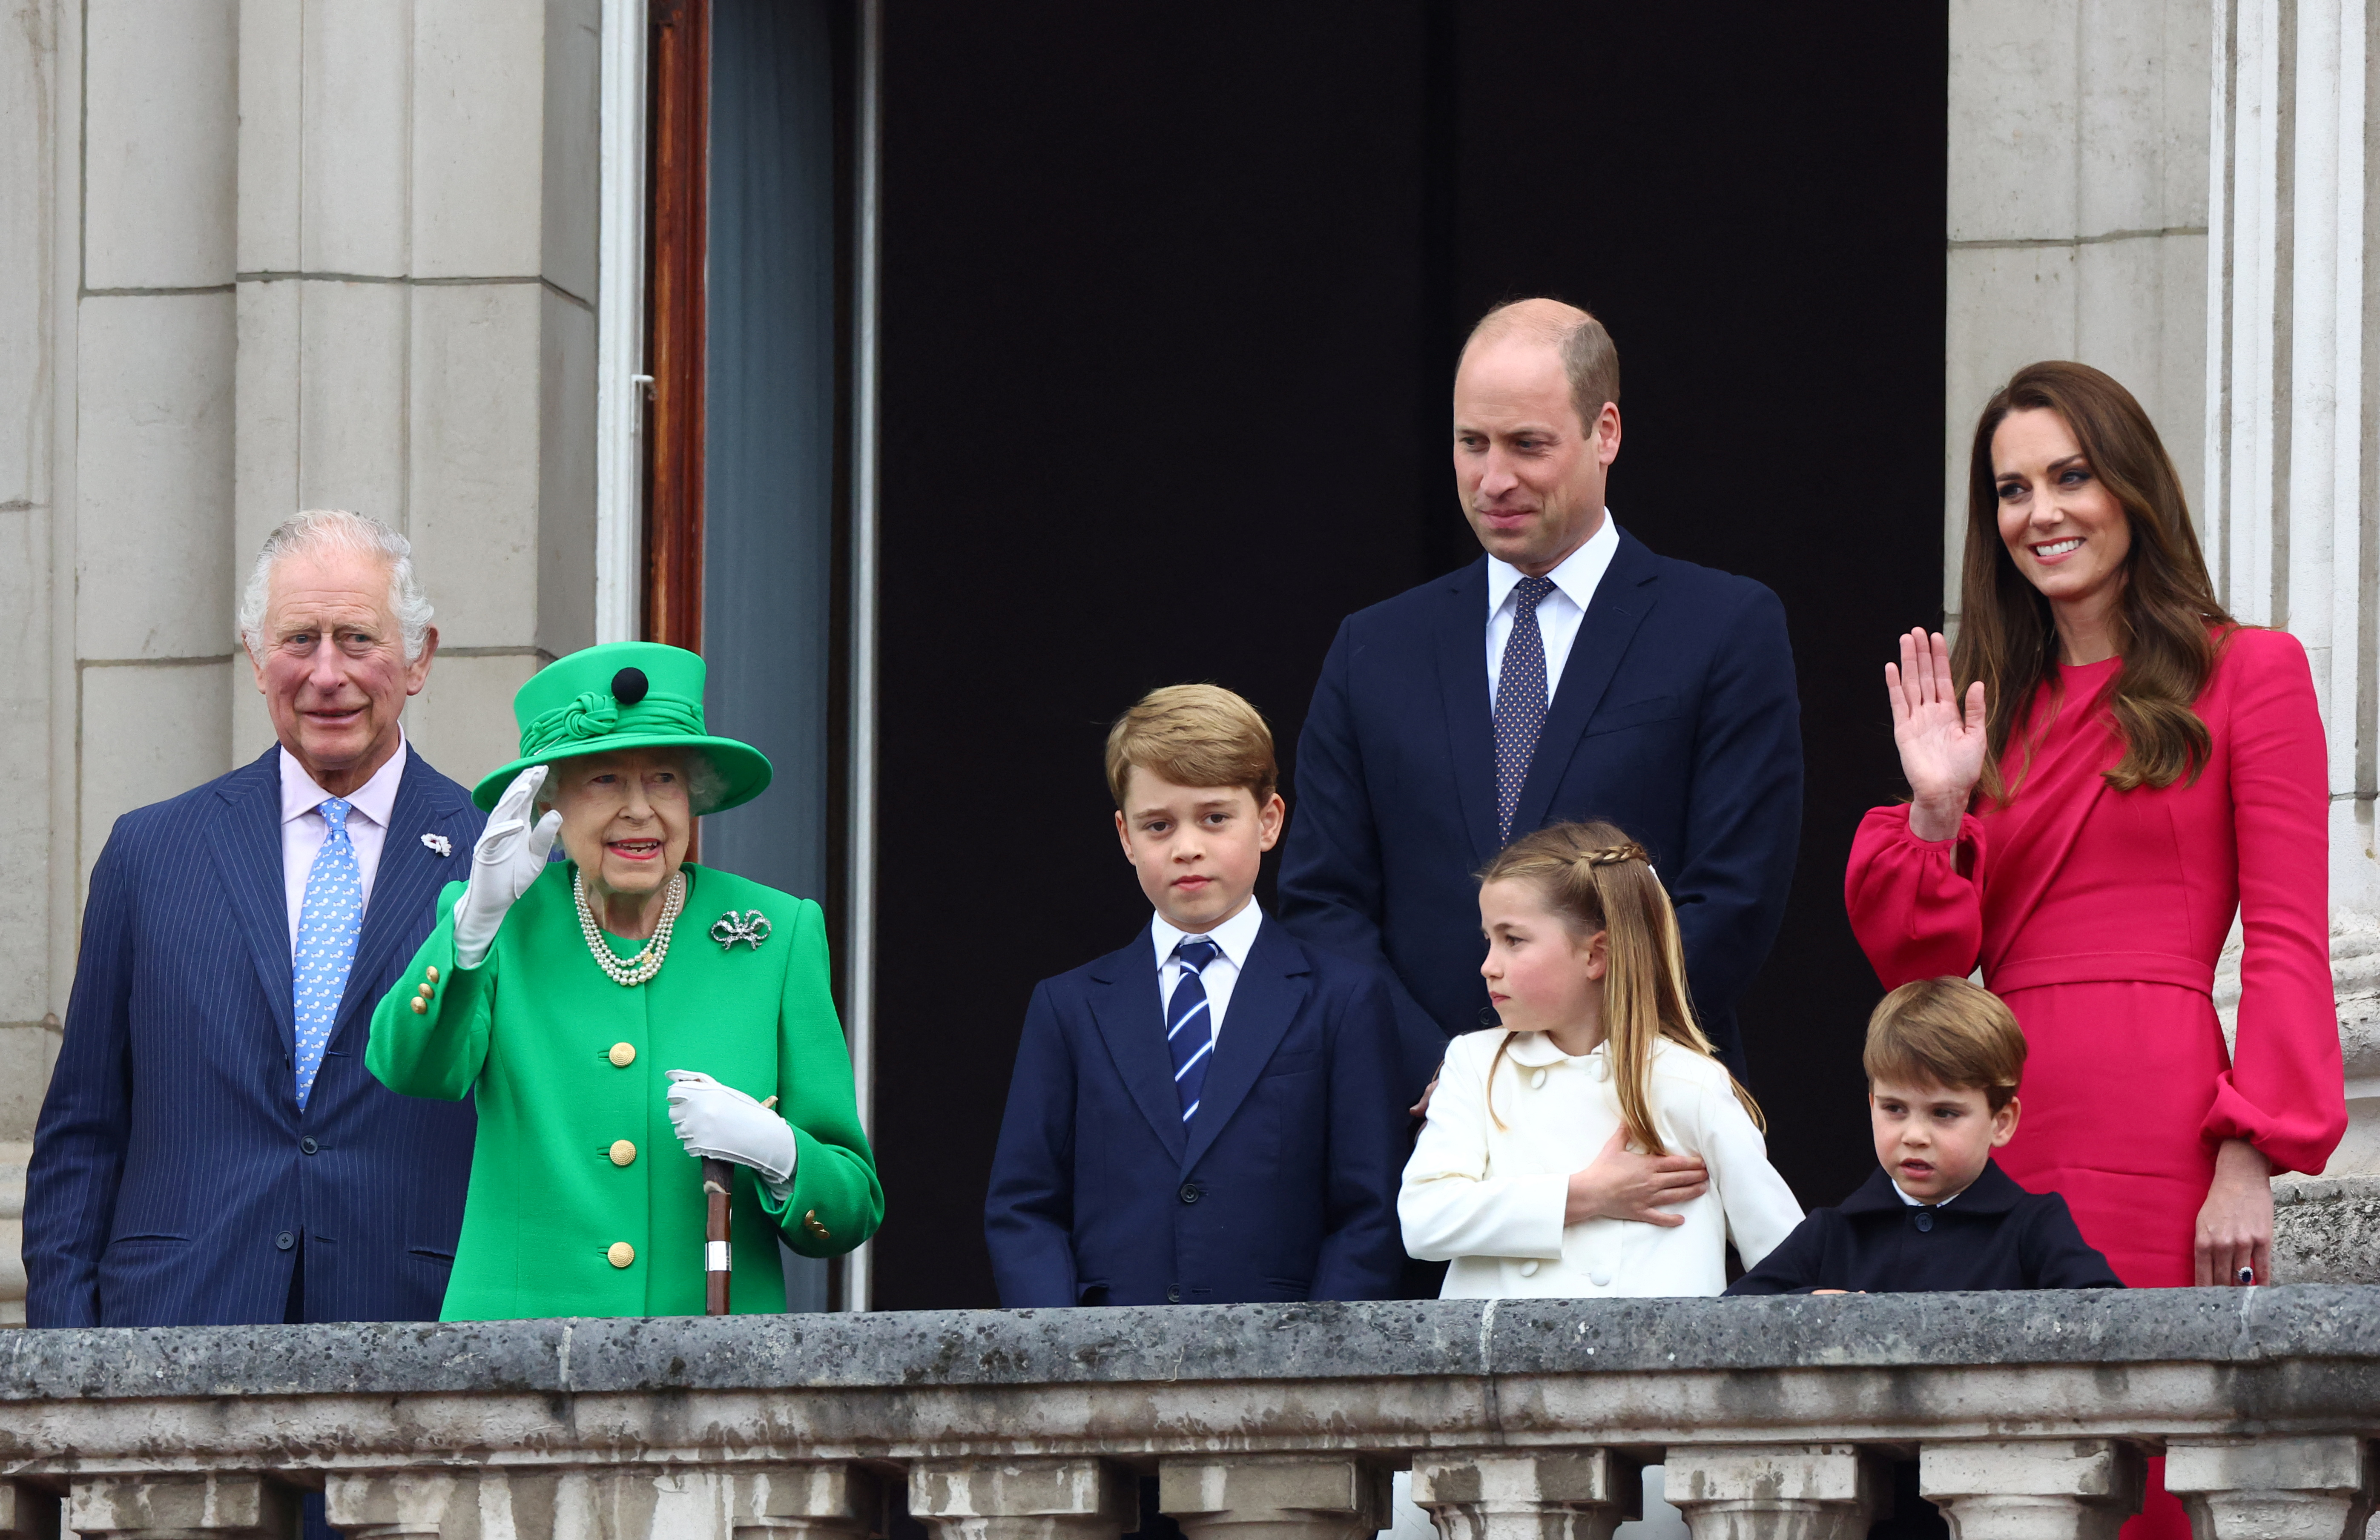 Queen Elizabeth, Prince William, Kate, Duchess of Cambridge, Prince George, Princess Charlotte, Prince Louis, Prince Charles and Camilla, Duchess of Cornwall stand on a balcony during the Platinum Jubilee Parade, marking the end of Britain's Platinum Jubilee celebrations for Queen Elizabeth.  Photograph: Hannah McKay/Reuters